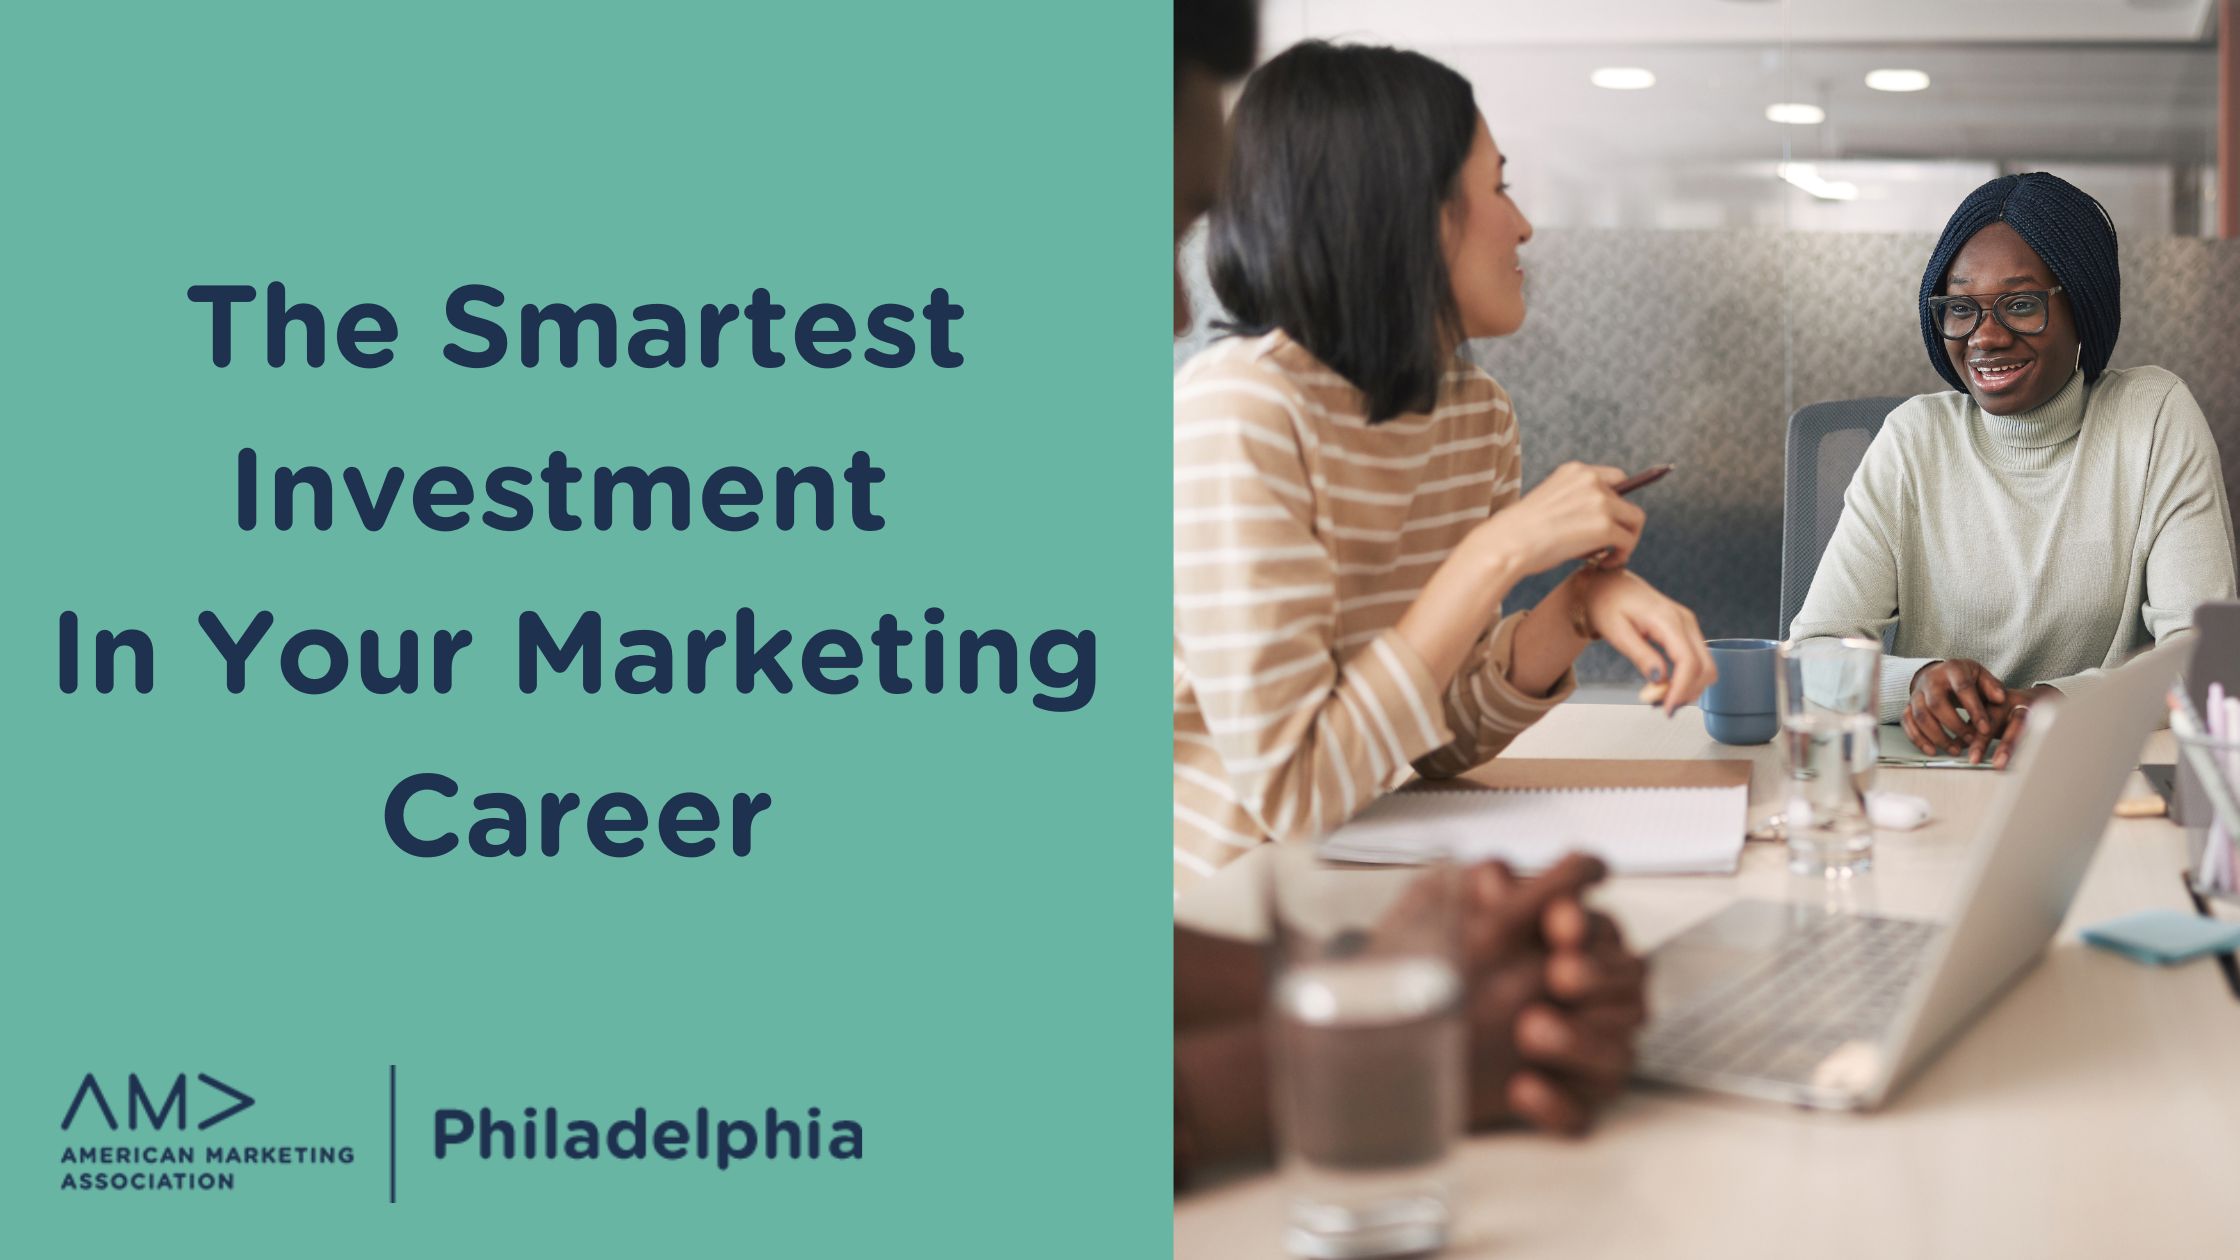 The Smartest Investment In Your Marketing Career